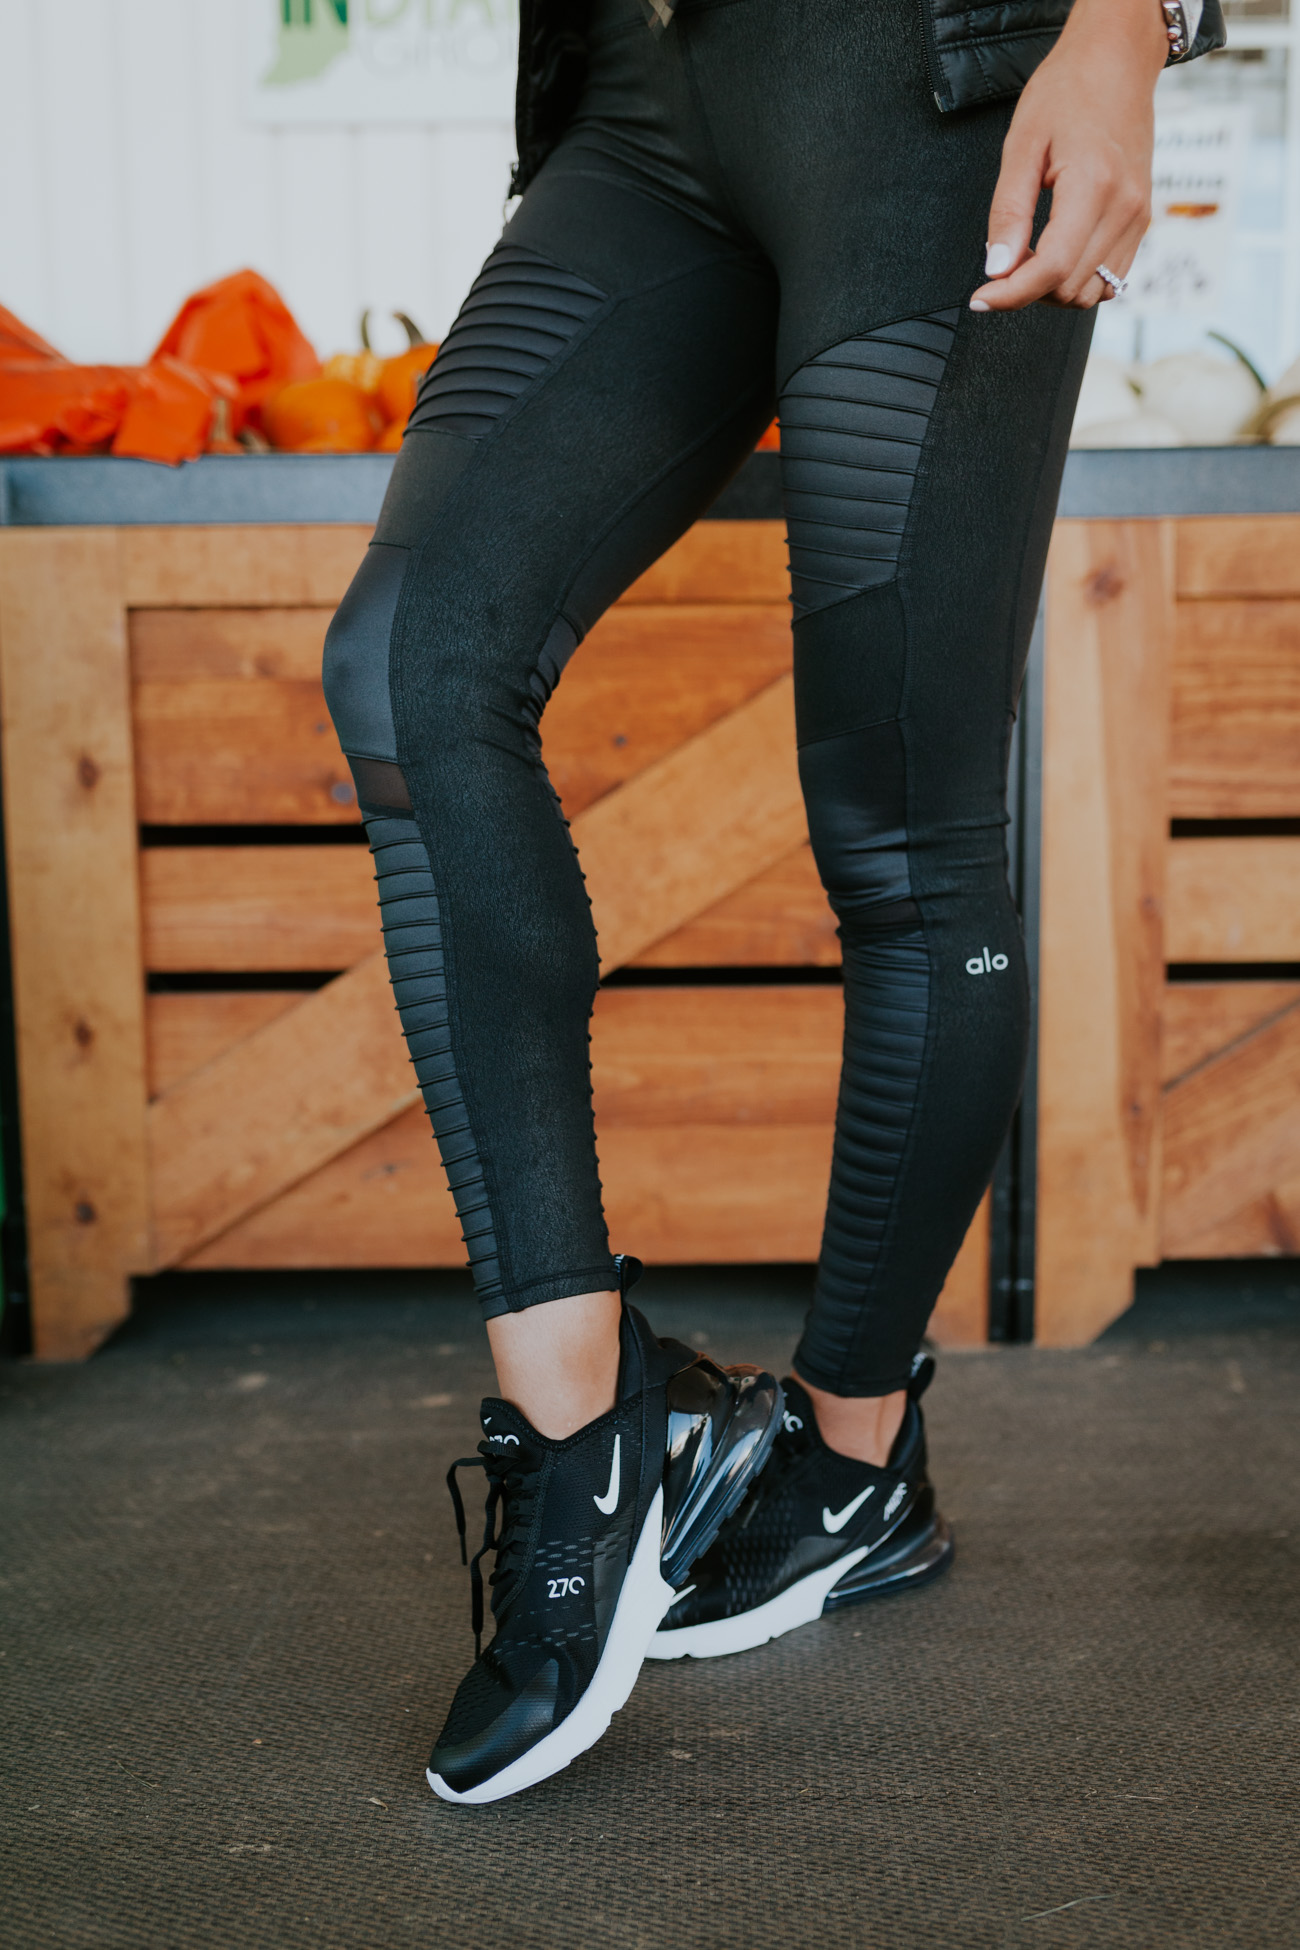 fall athleisure staples, nike air max 270, fall activewear staples, activewear outfit, athleisure outfit, ebay outfit, ebay fashion, how to shop on ebay // grace wainwright grace white a southern drawl